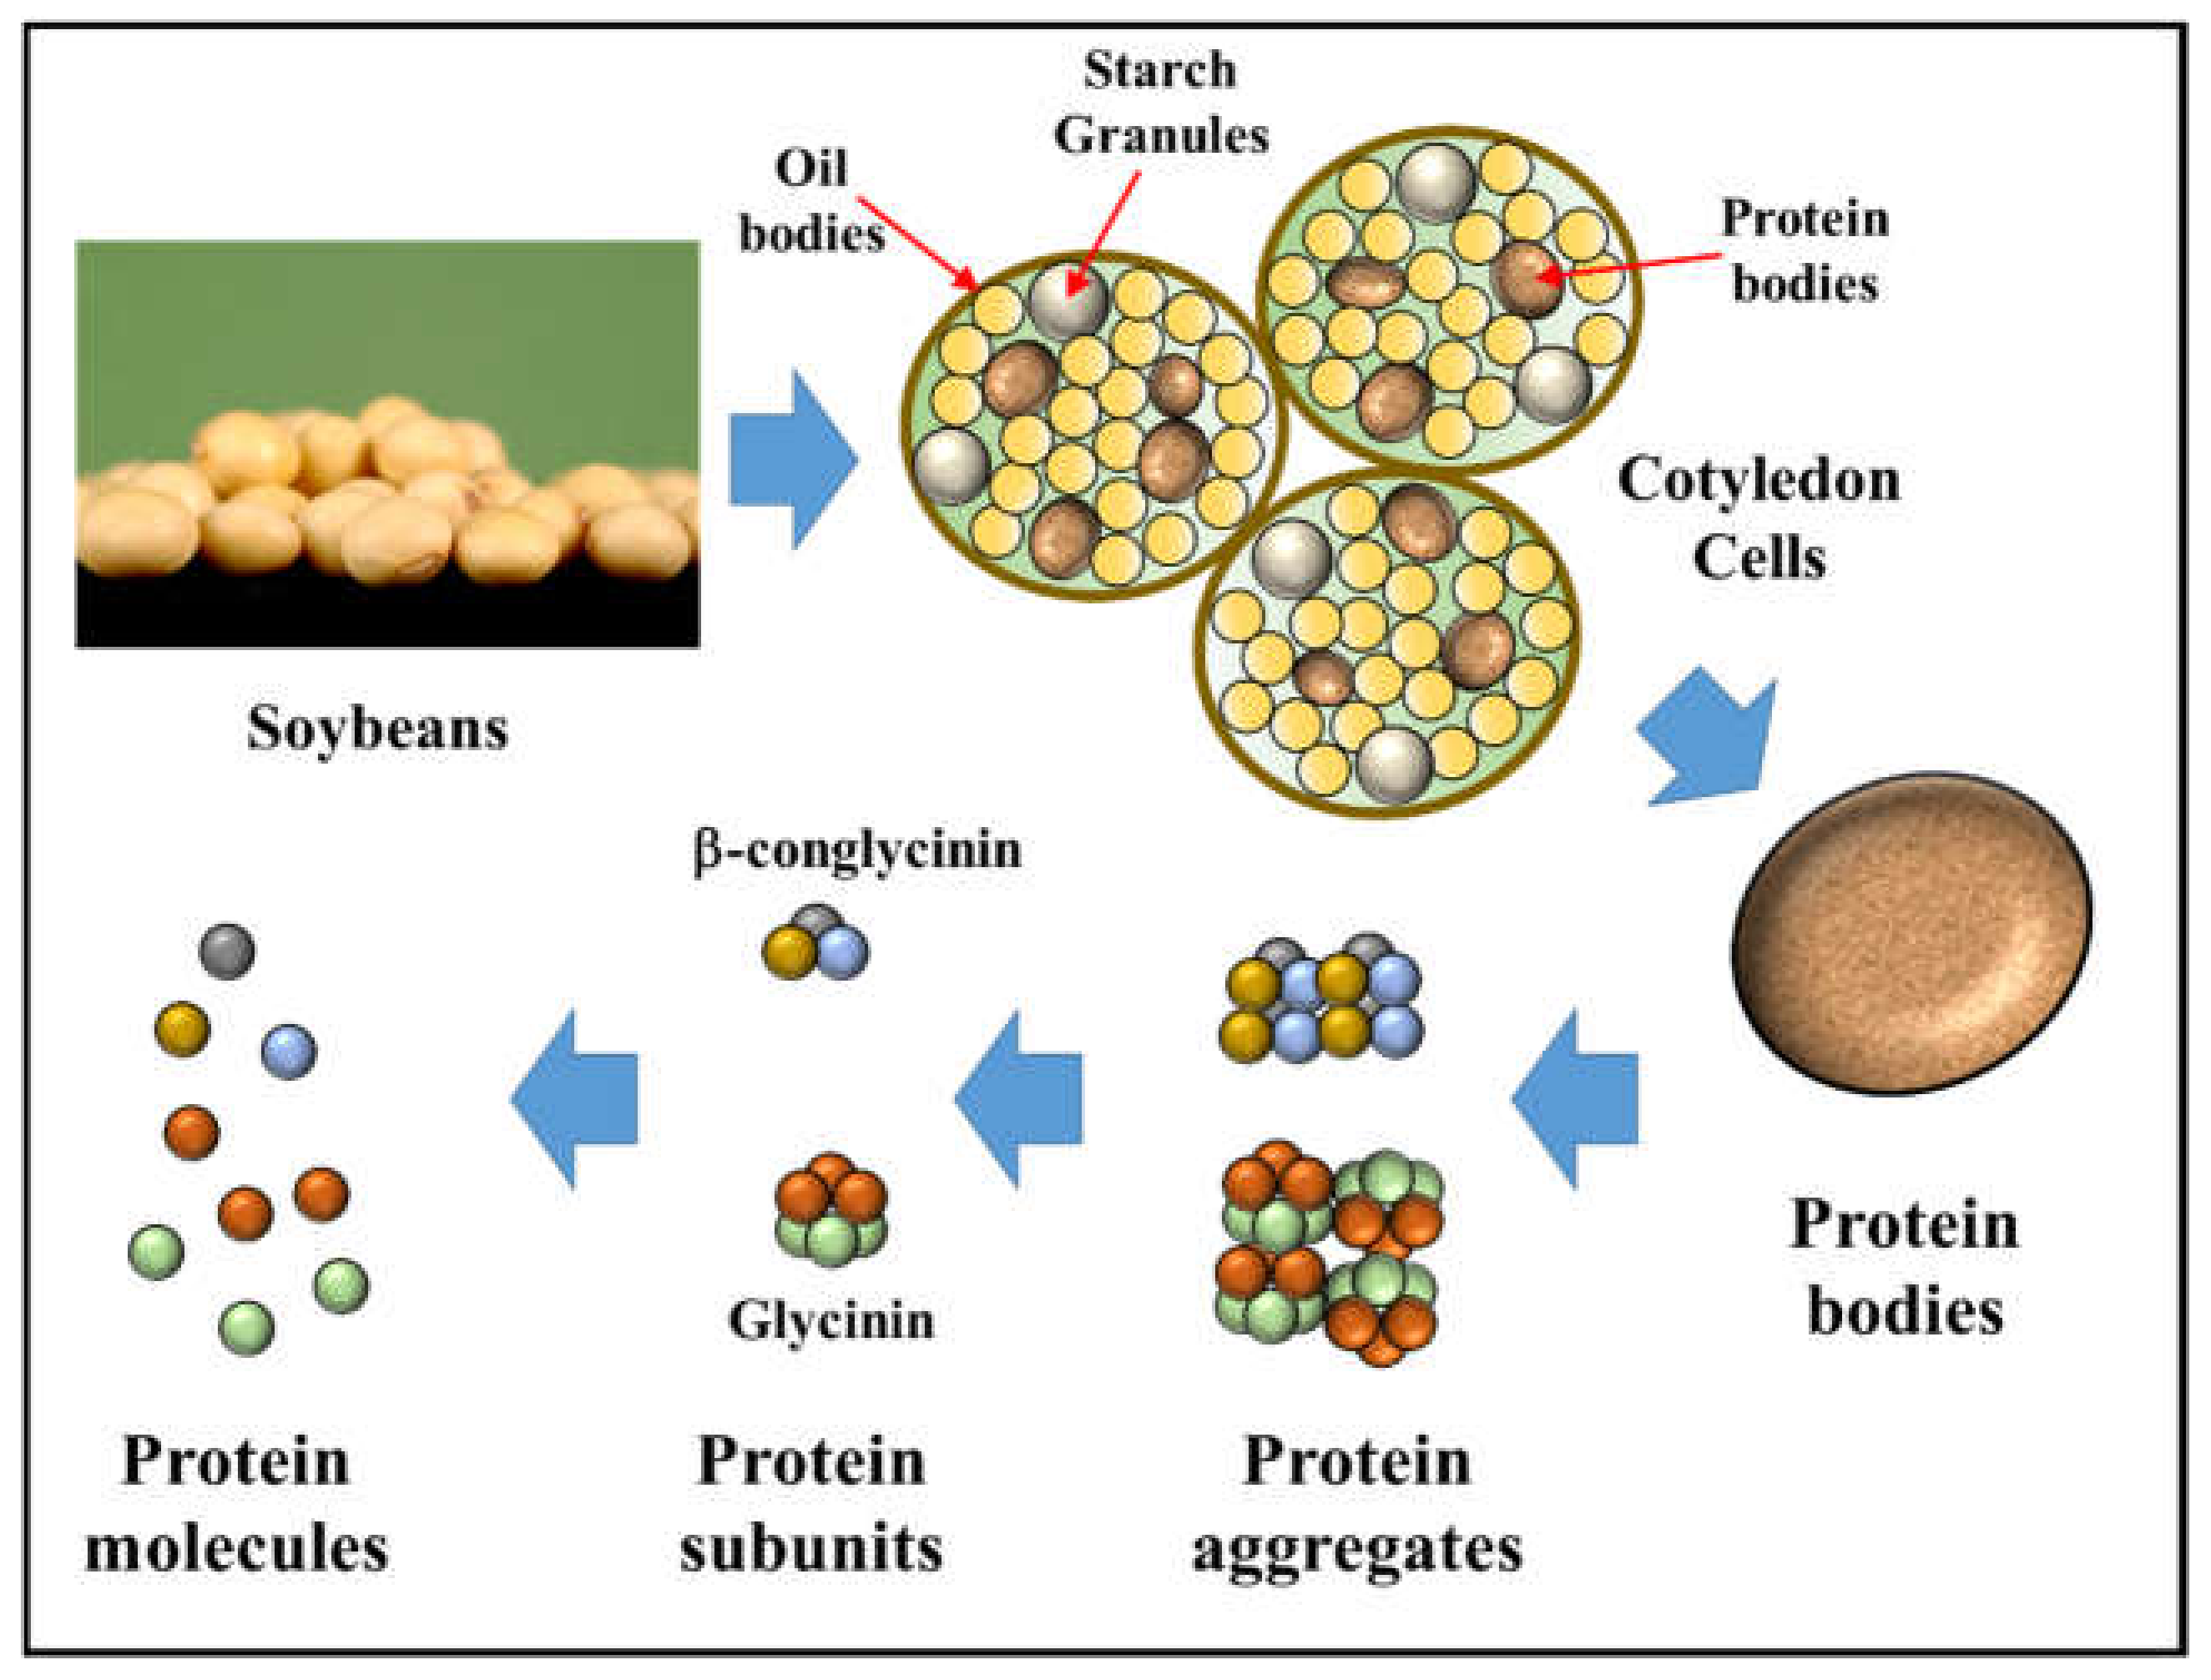 Colloids and Interfaces | Free Full-Text | Proposed Methods for Testing and  Comparing the Emulsifying Properties of Proteins from Animal, Plant, and  Alternative Sources